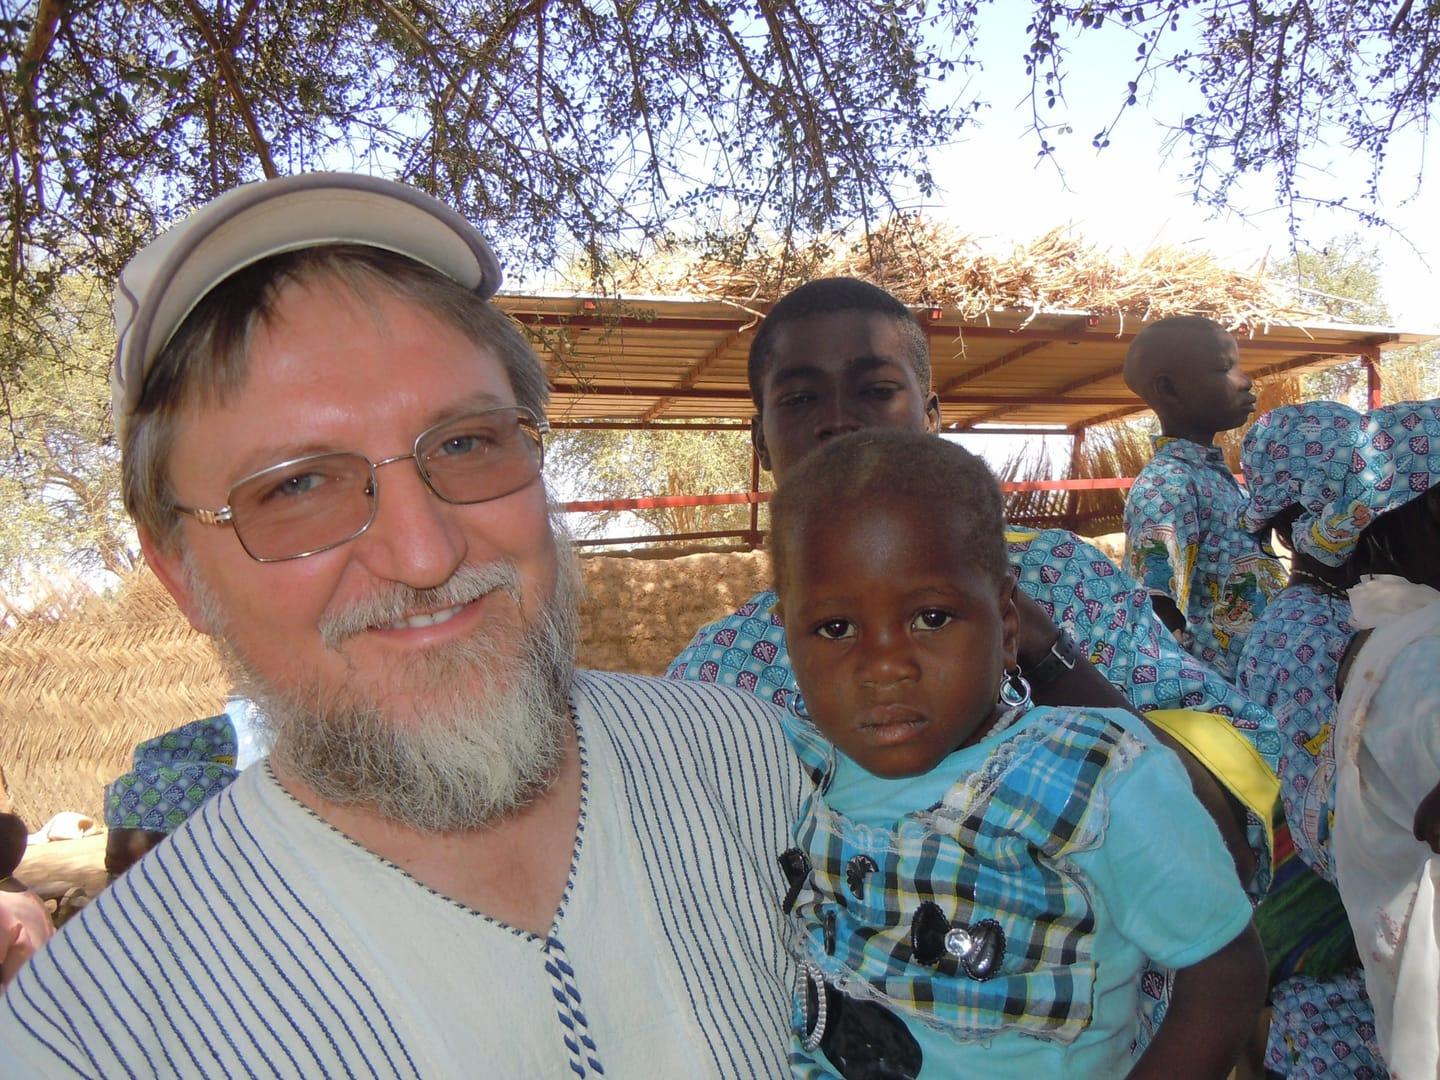 Freed missionary priest recounts harrowing tale of kidnapping